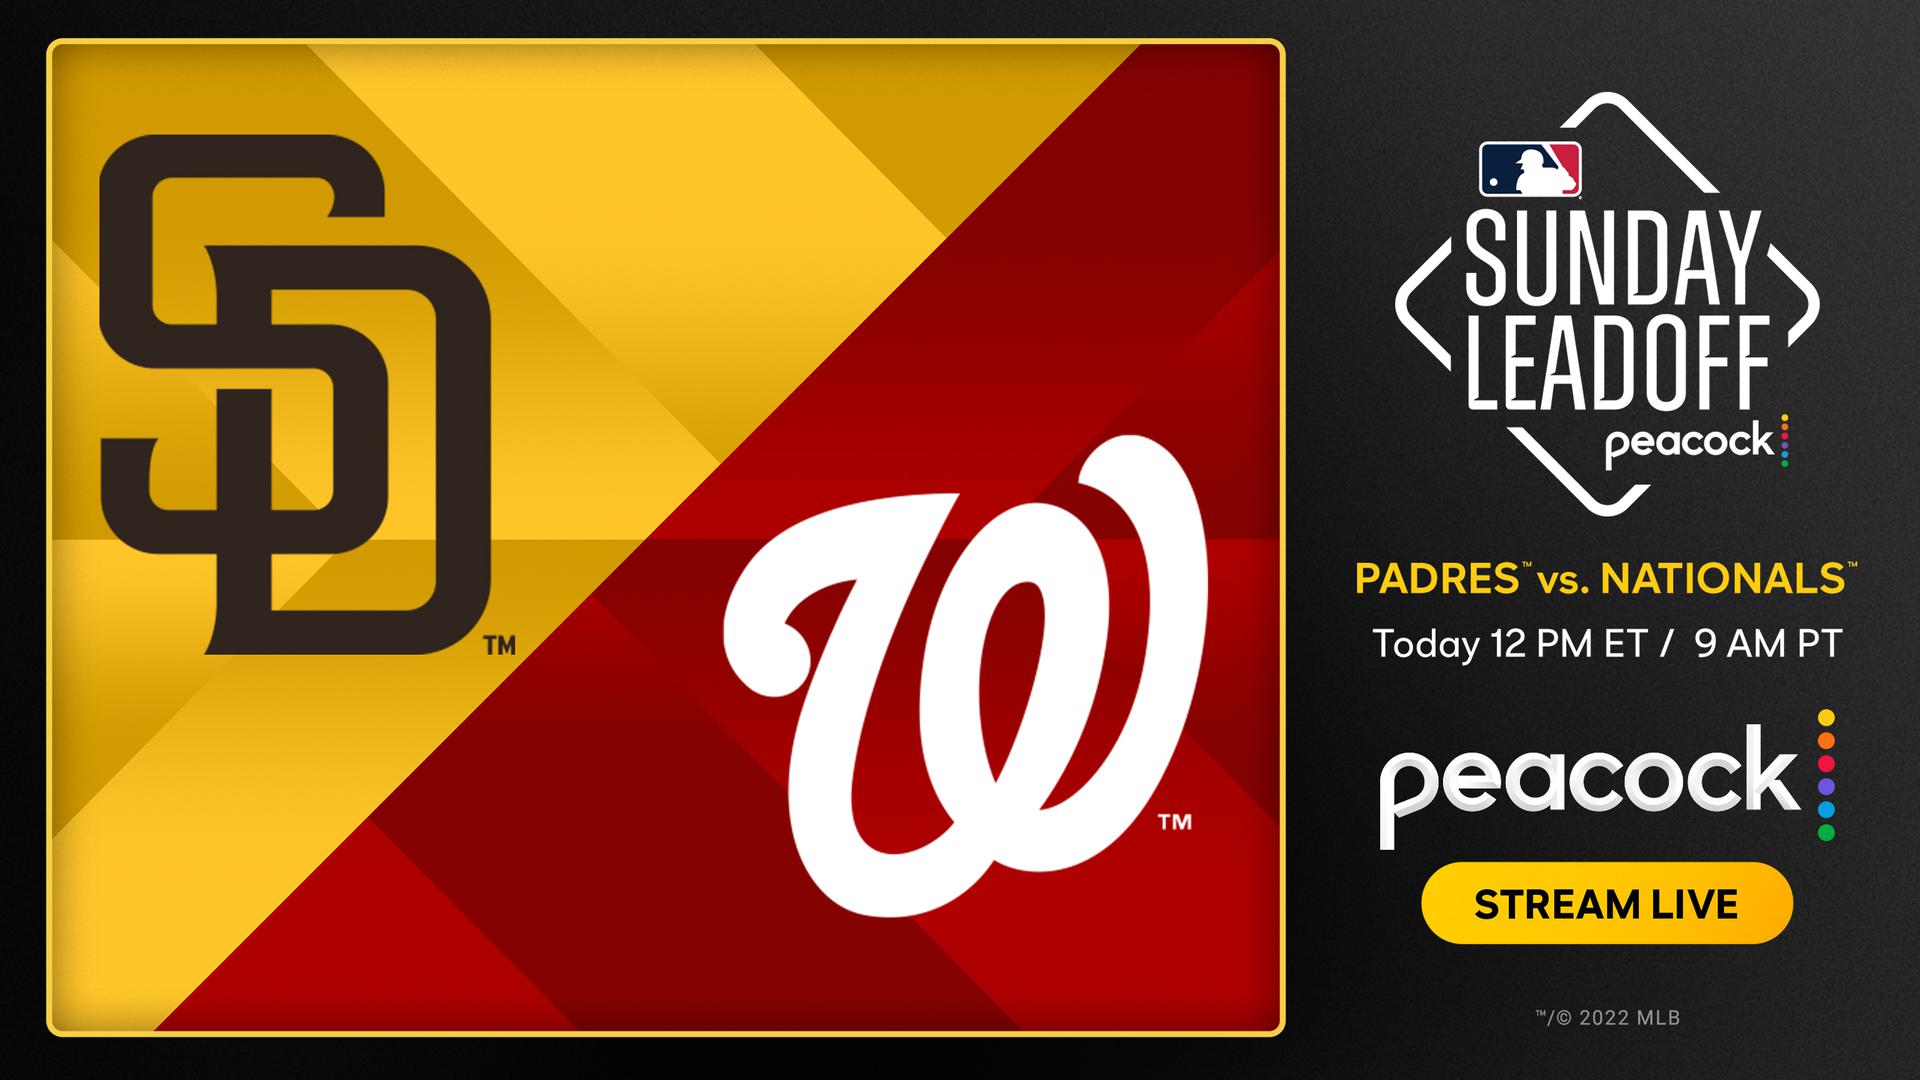 Padres vs. Nationals on MLB Sunday Leadoff on Peacock network